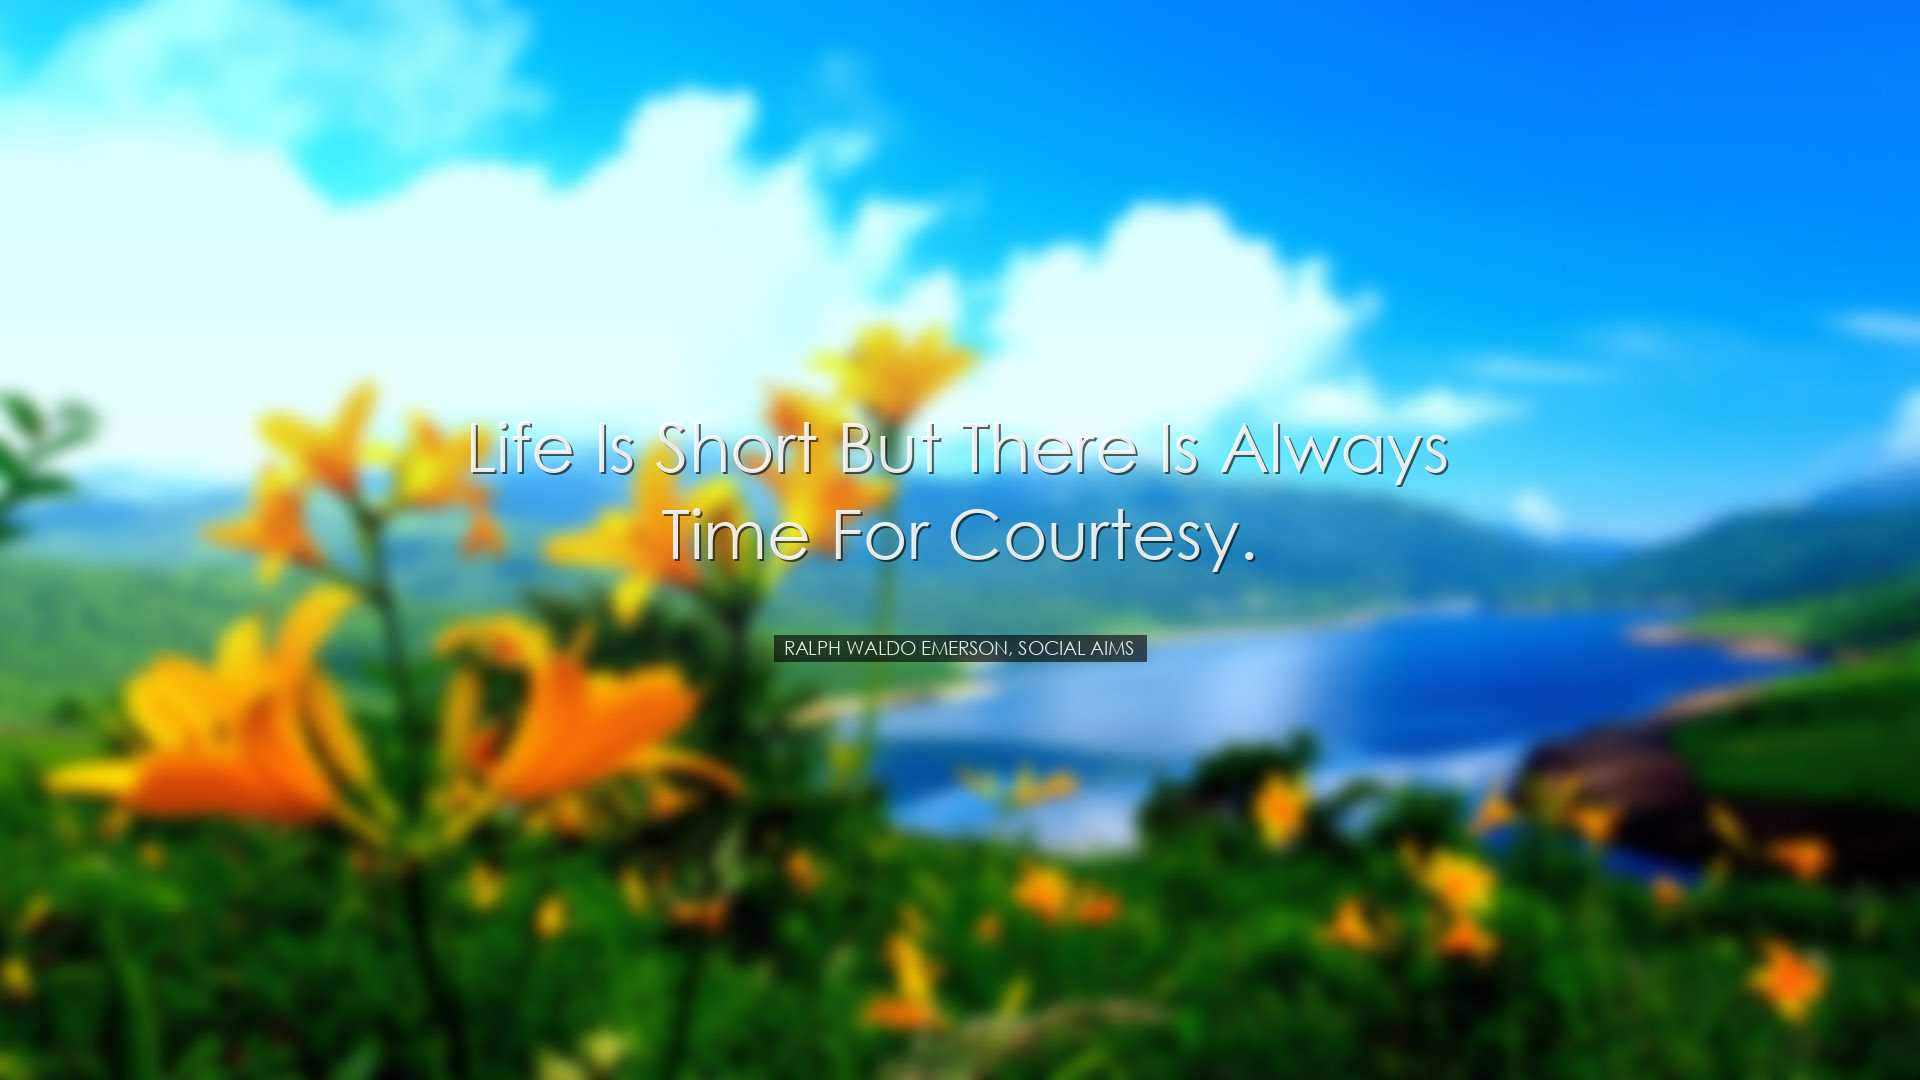 Life is short but there is always time for courtesy. - Ralph Waldo